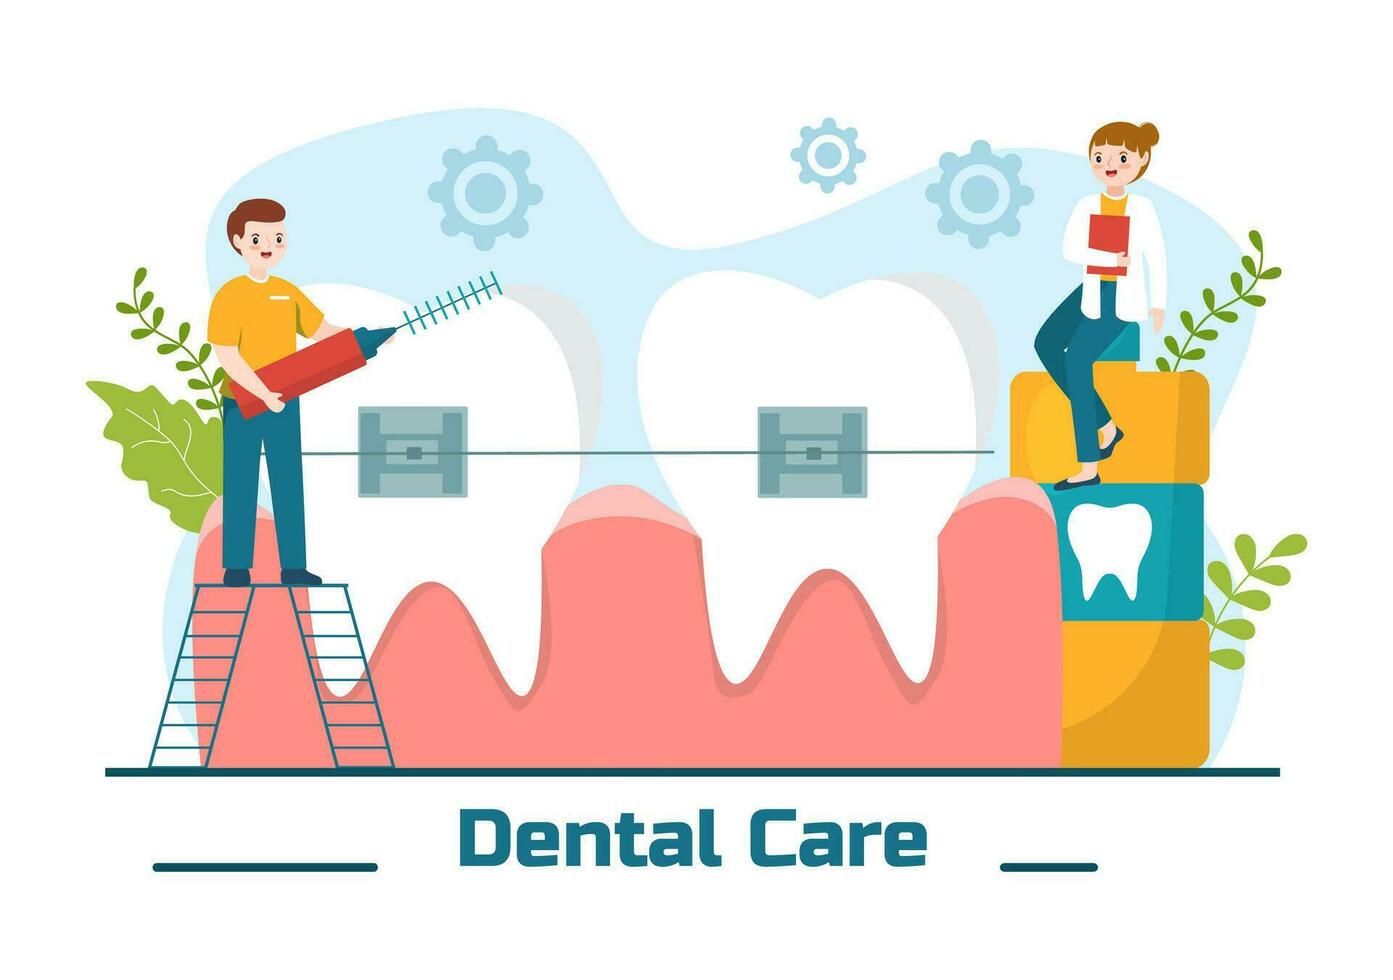 Dental Care Vector Illustration with Dentist Treating Human Teeth and Cleaning Using Medical Equipment in Healthcare Flat Cartoon Background Design